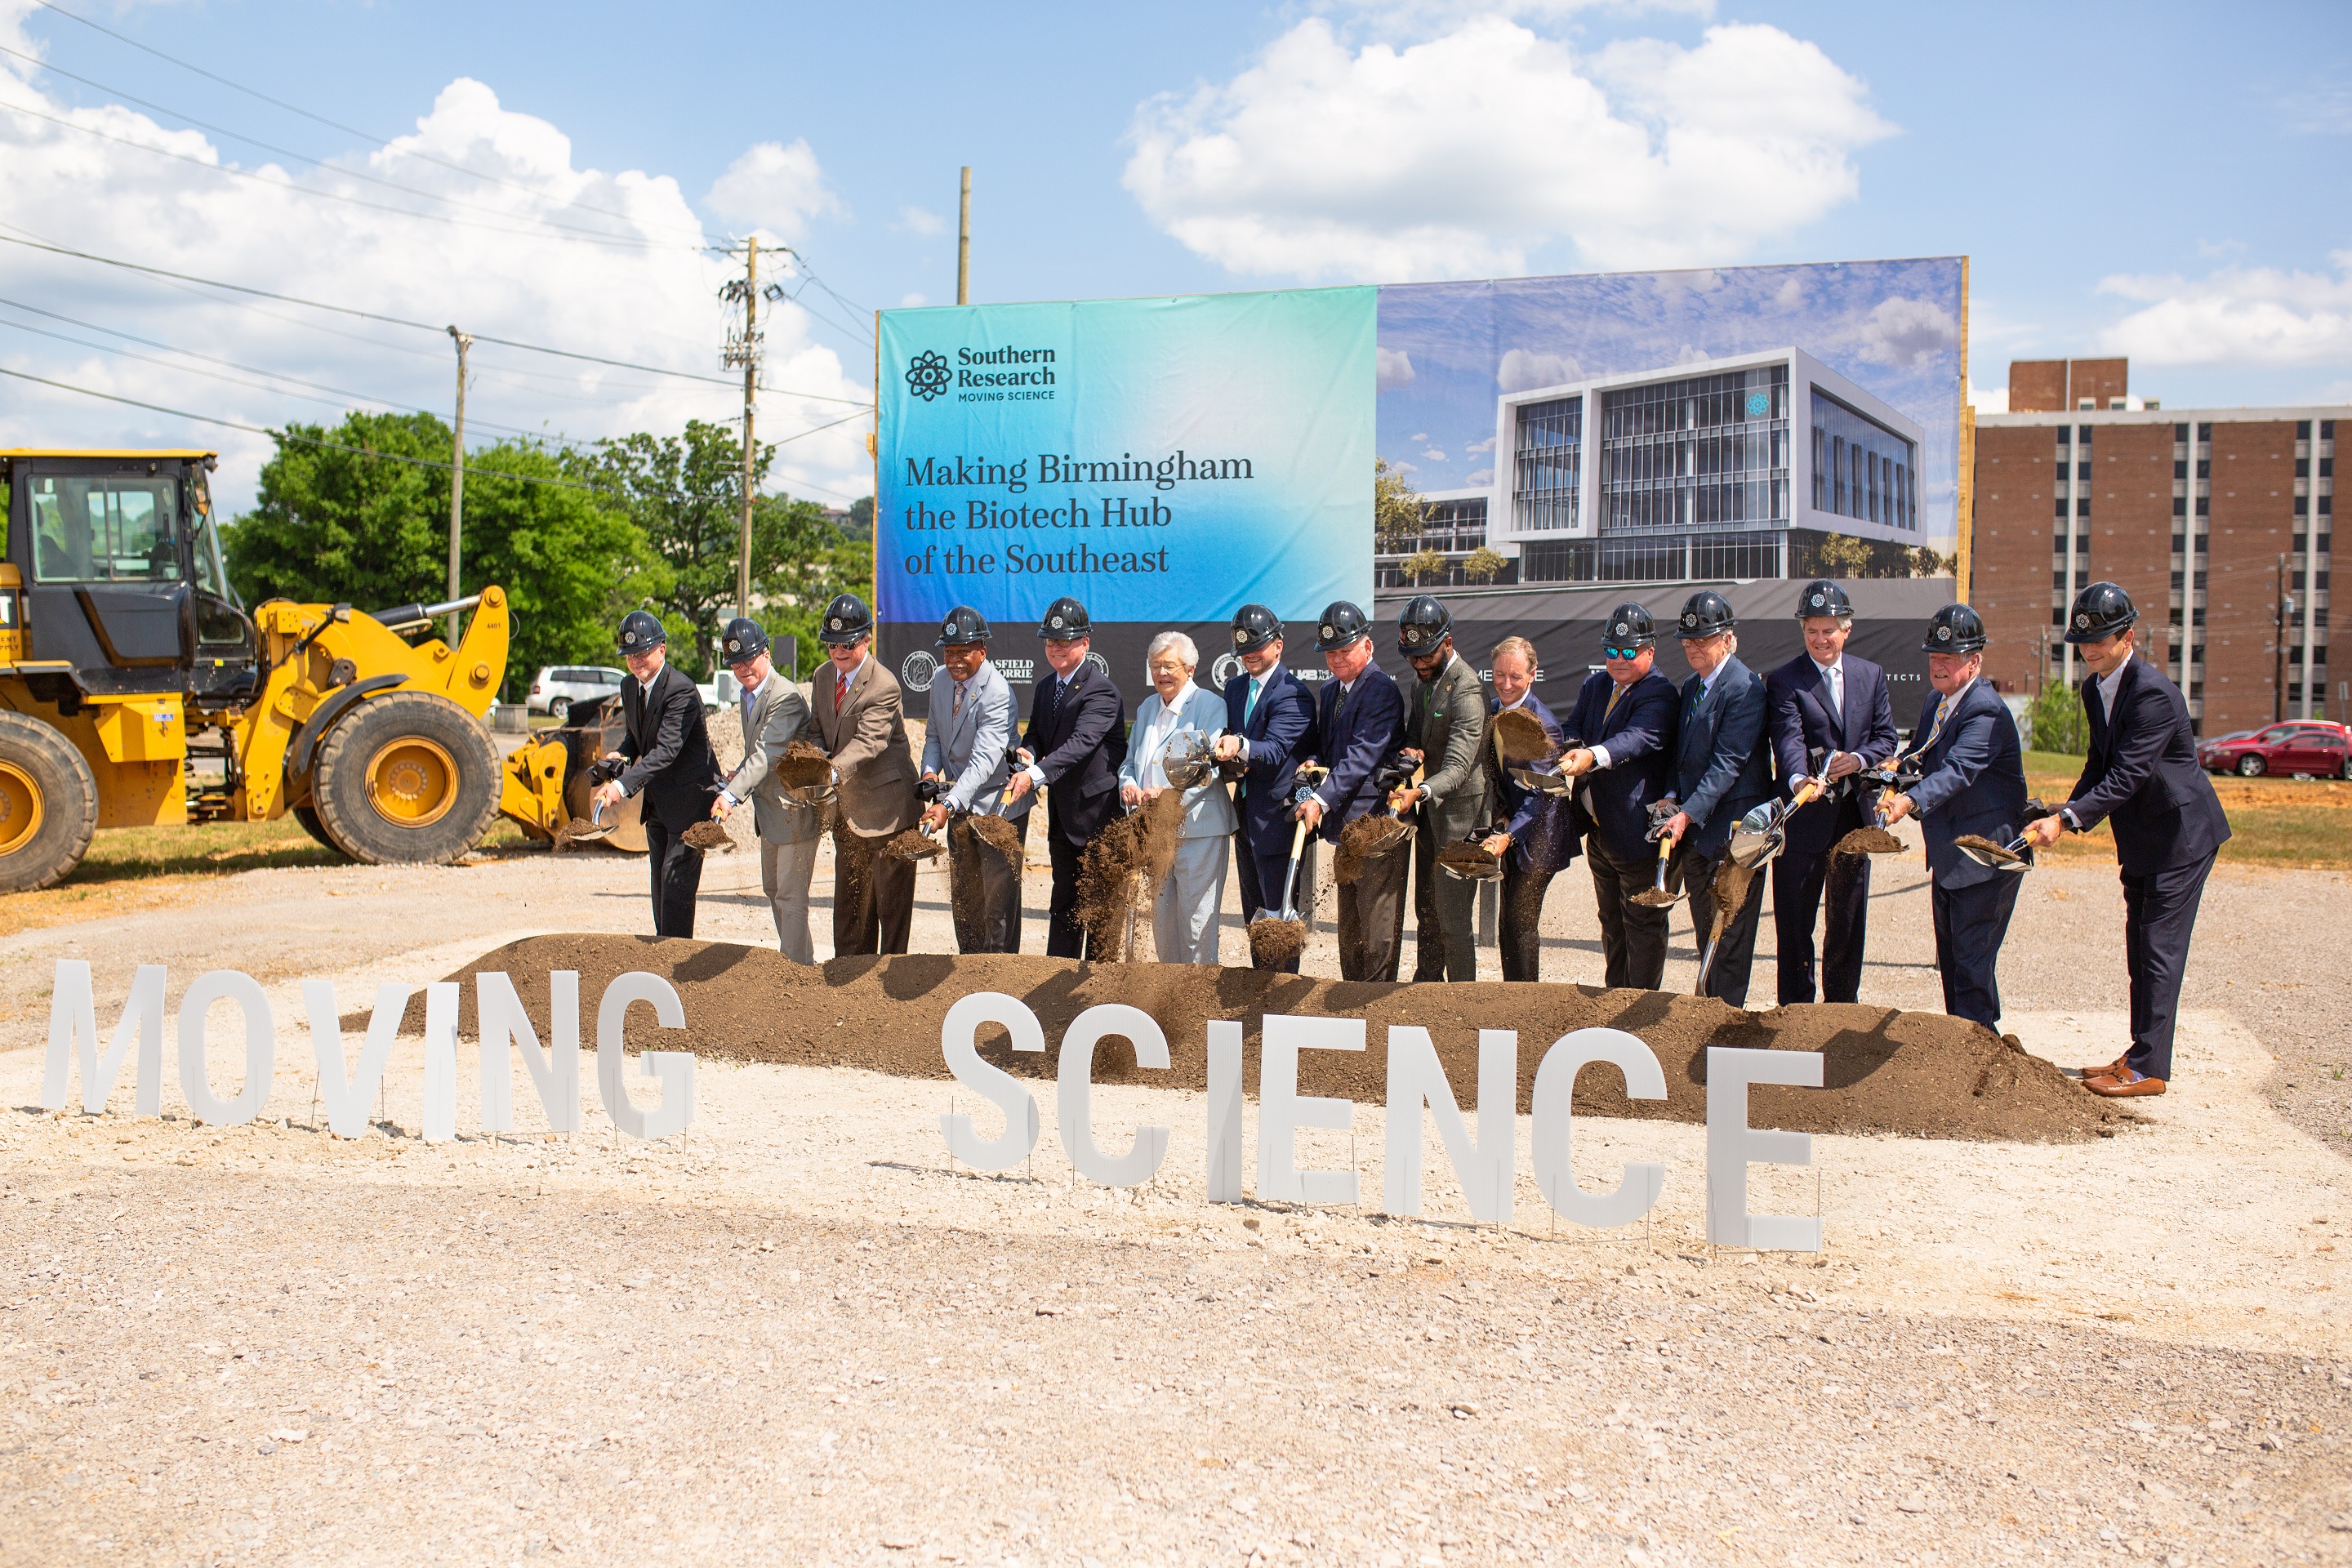 A group with shovels digging into dirt behind letters that spell out "moving science"